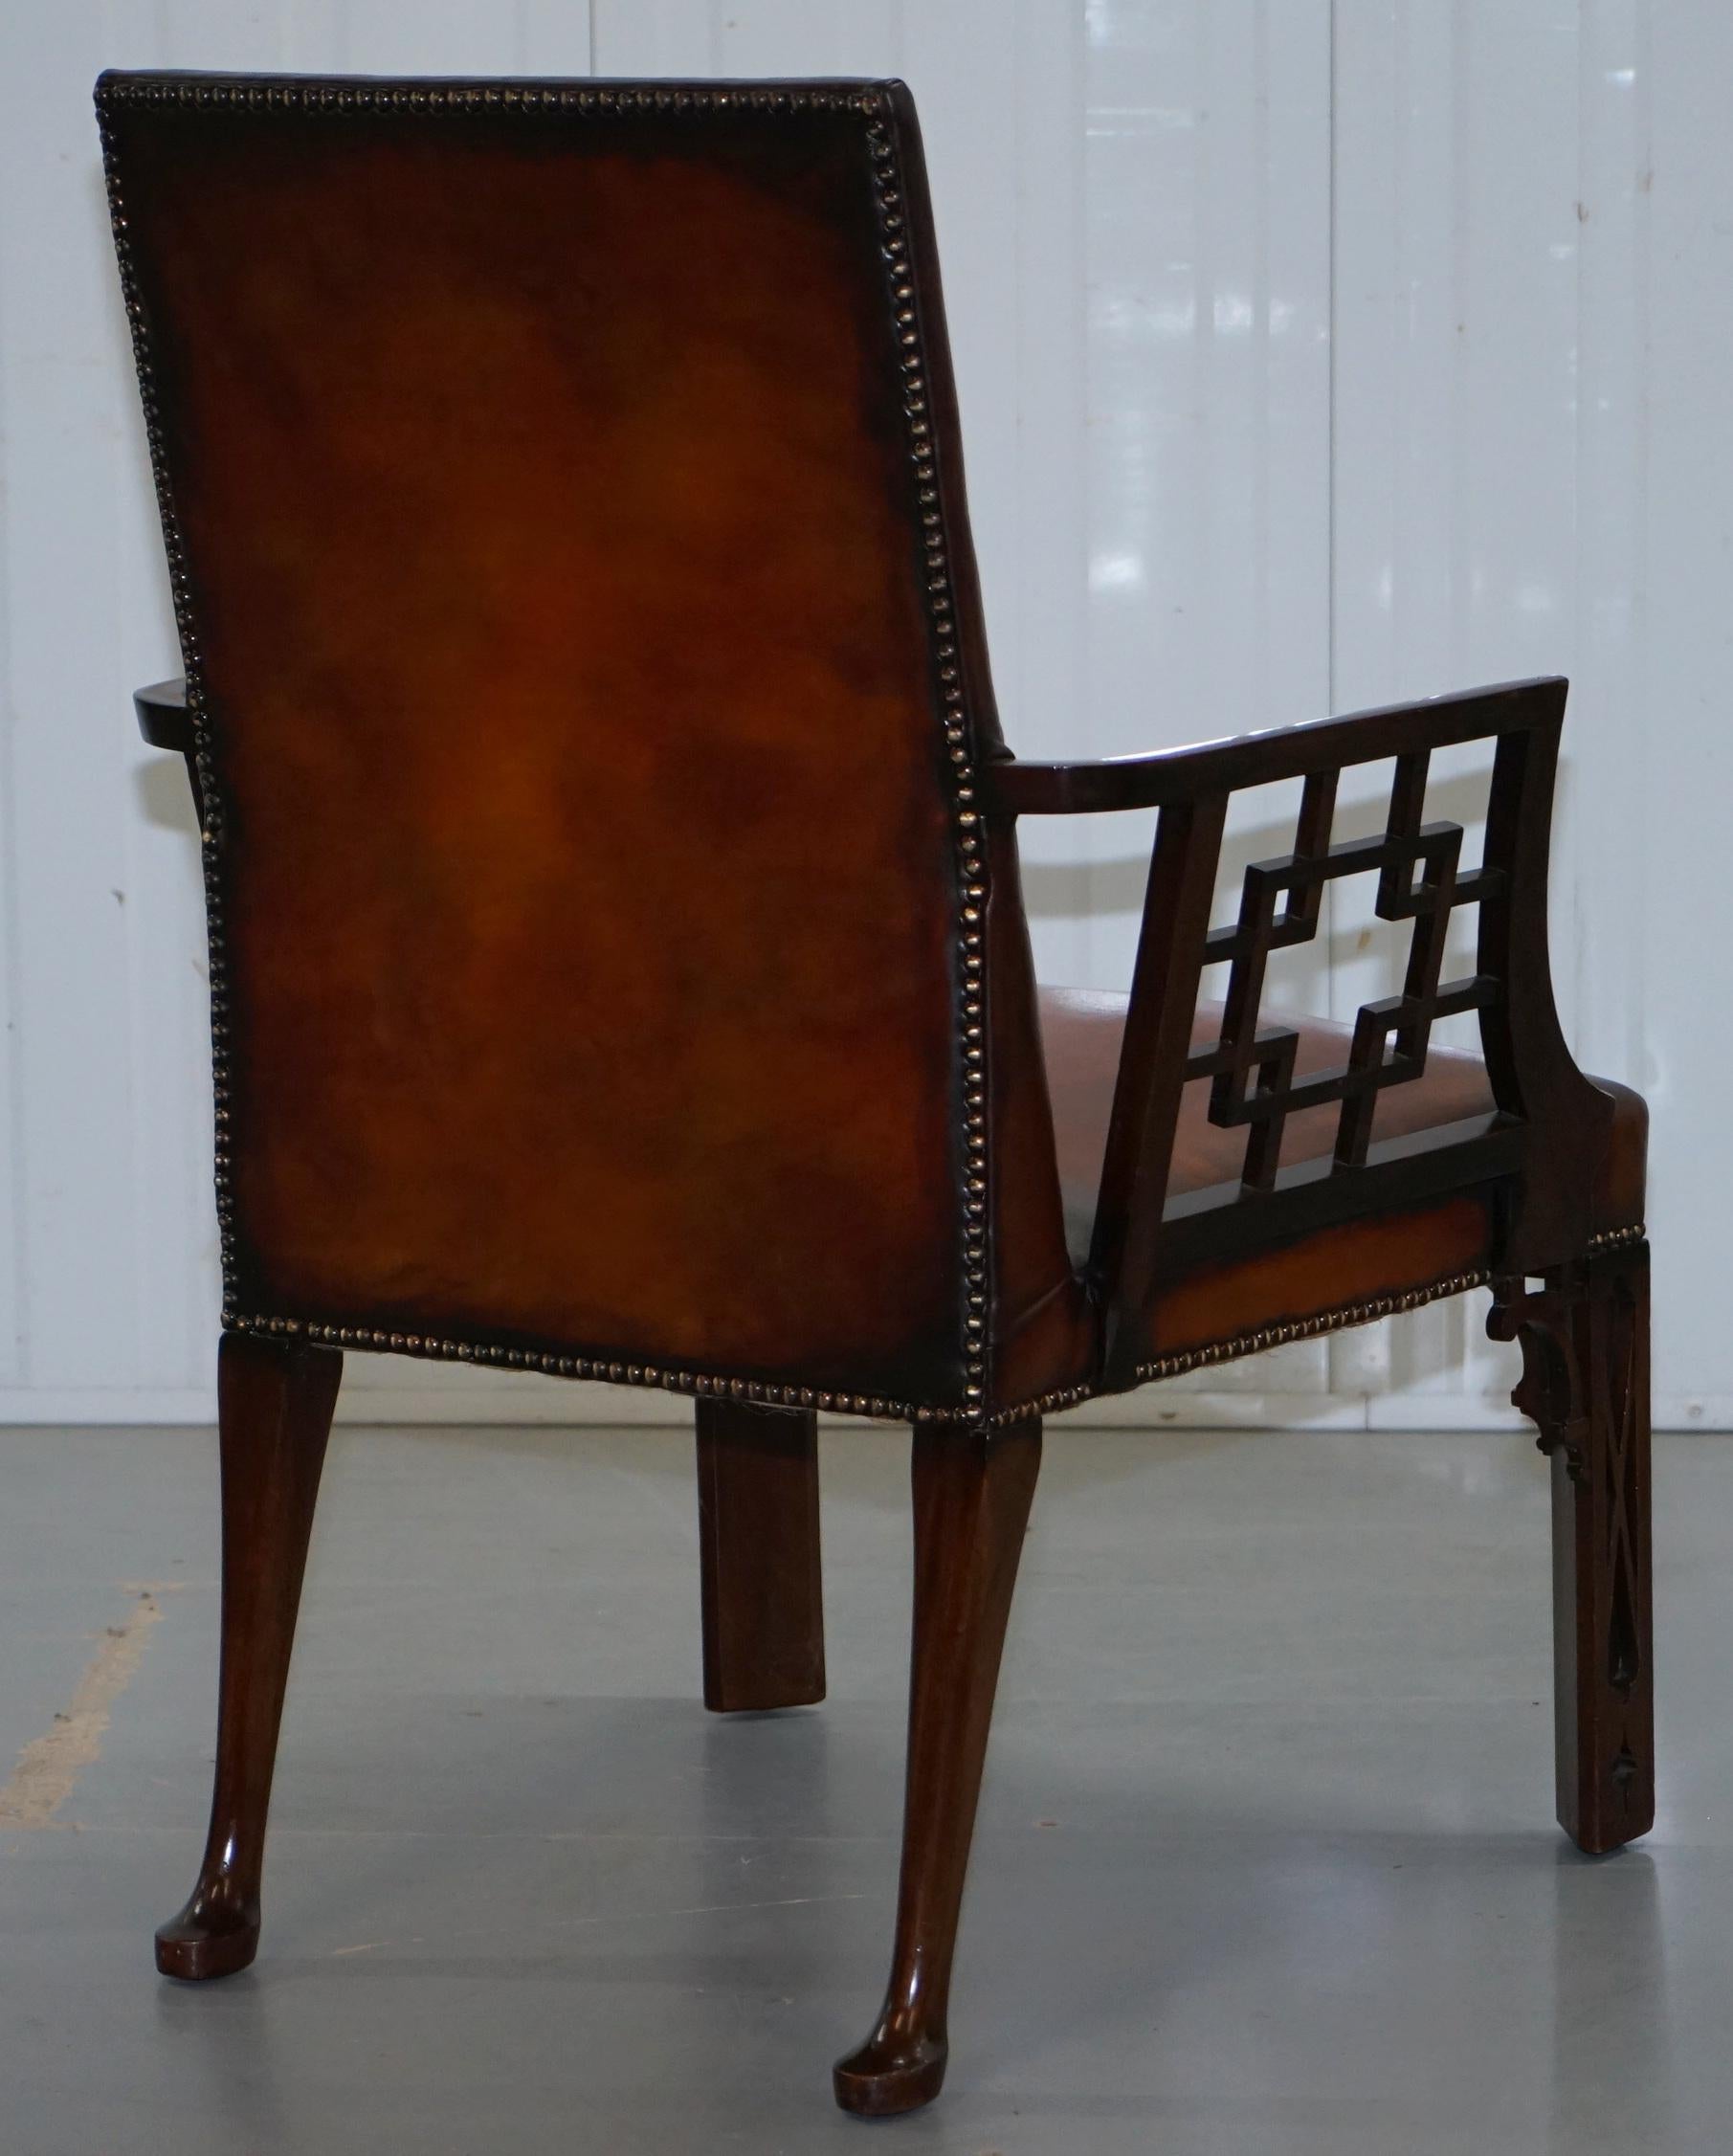 Rare circa 1830 Chinese Chippendale Fully Restored Brown Leather Armchair 12